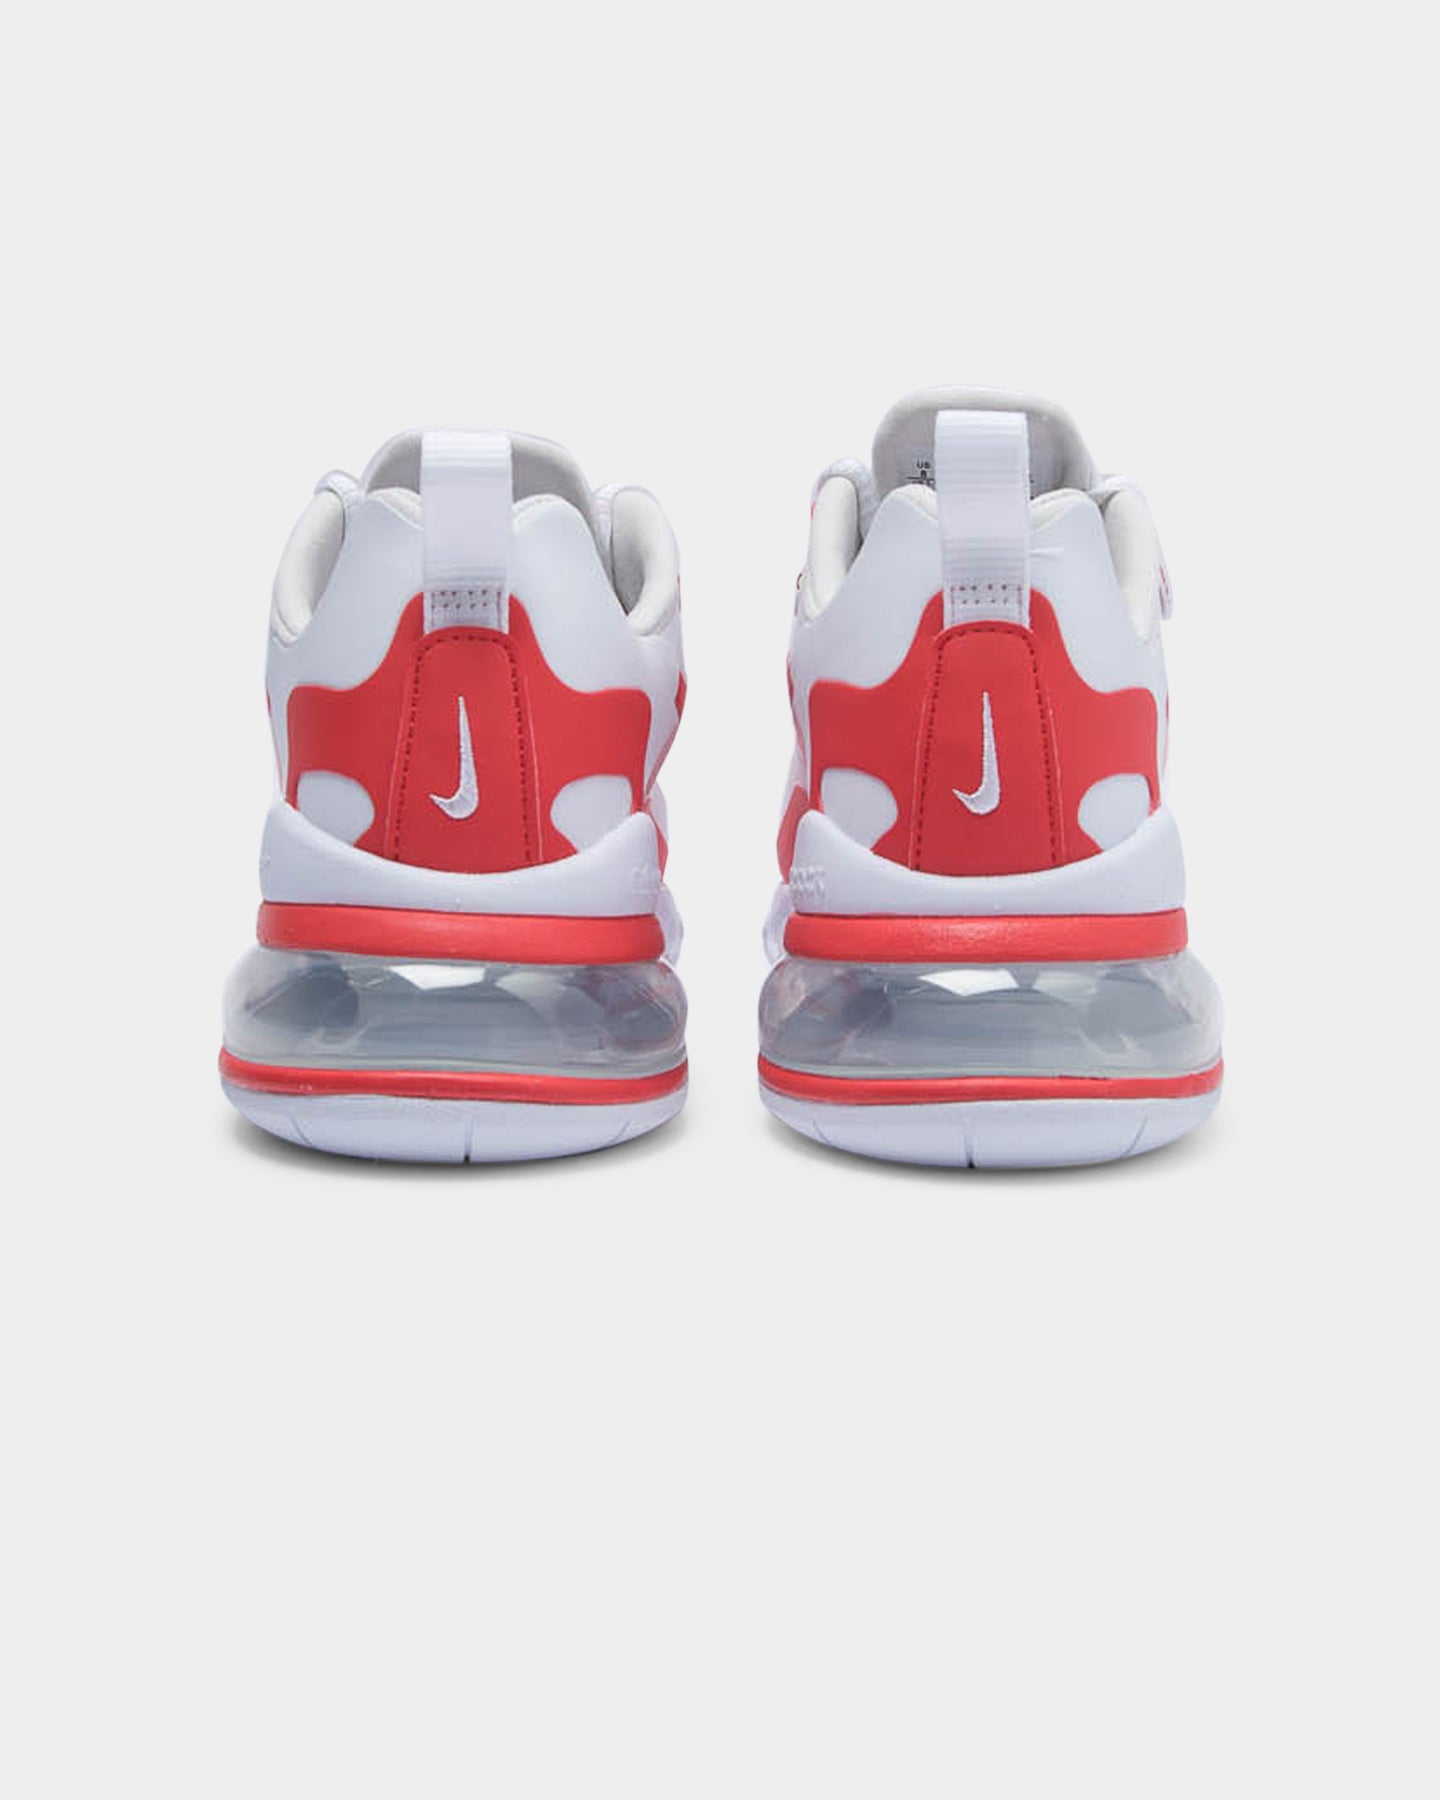 nike air max 270 womens white and red